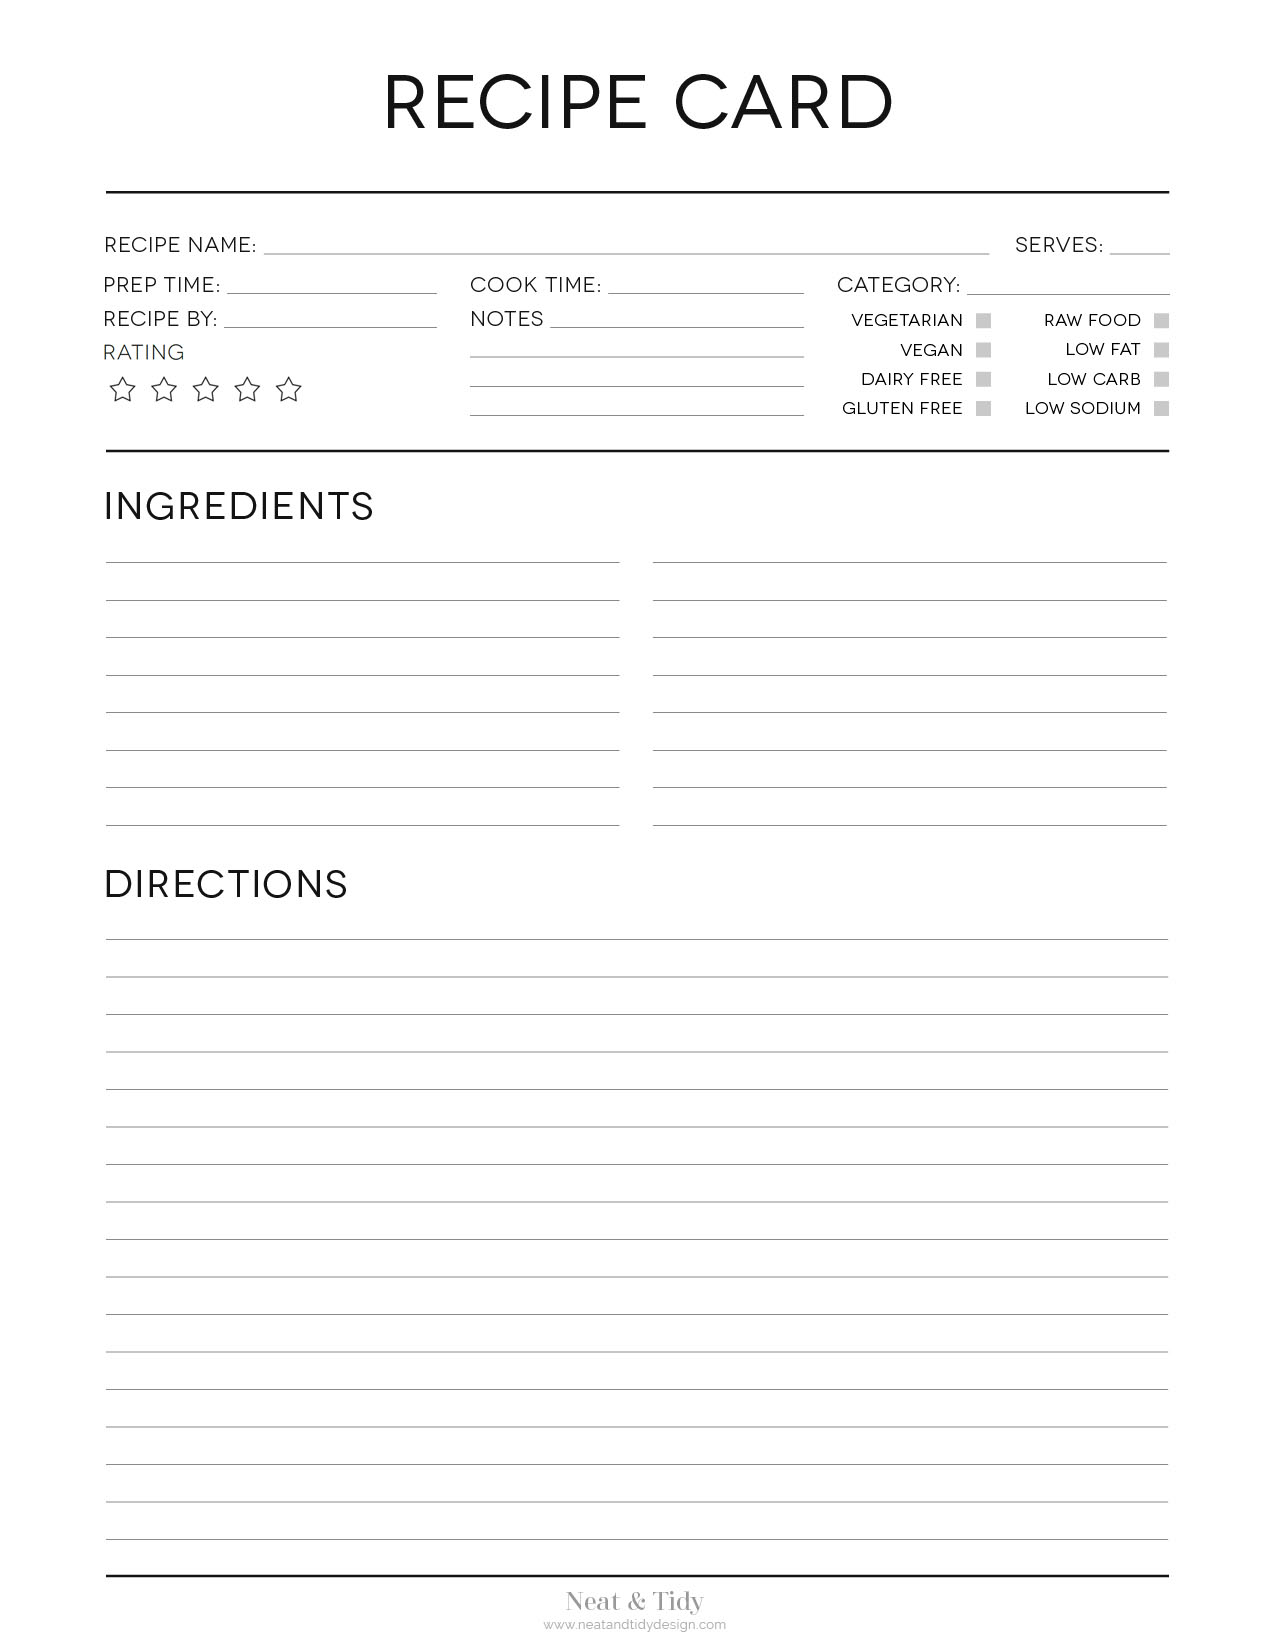 Recipe Card v22 - Black & White Intended For Fillable Recipe Card Template